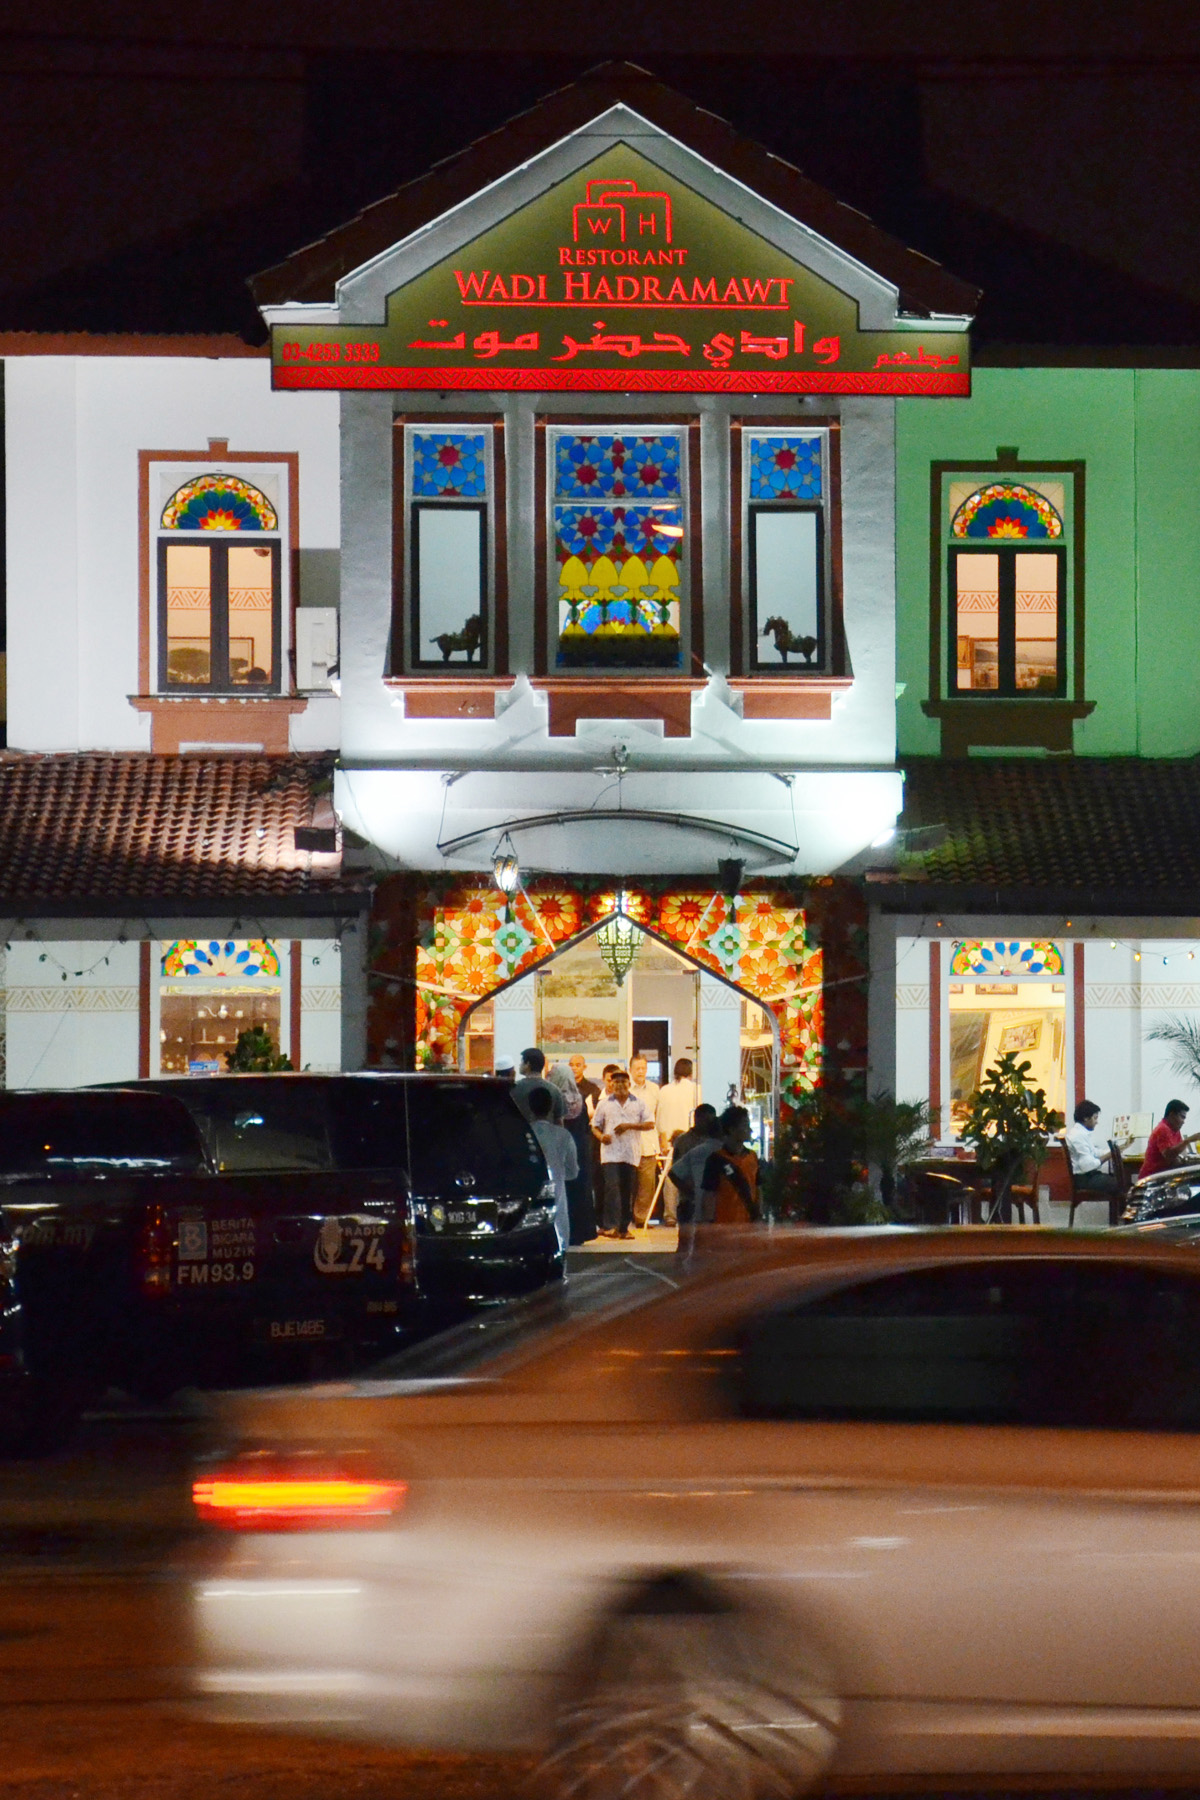 Hadhramaut continues to highlight Arabic presence in Malaysia